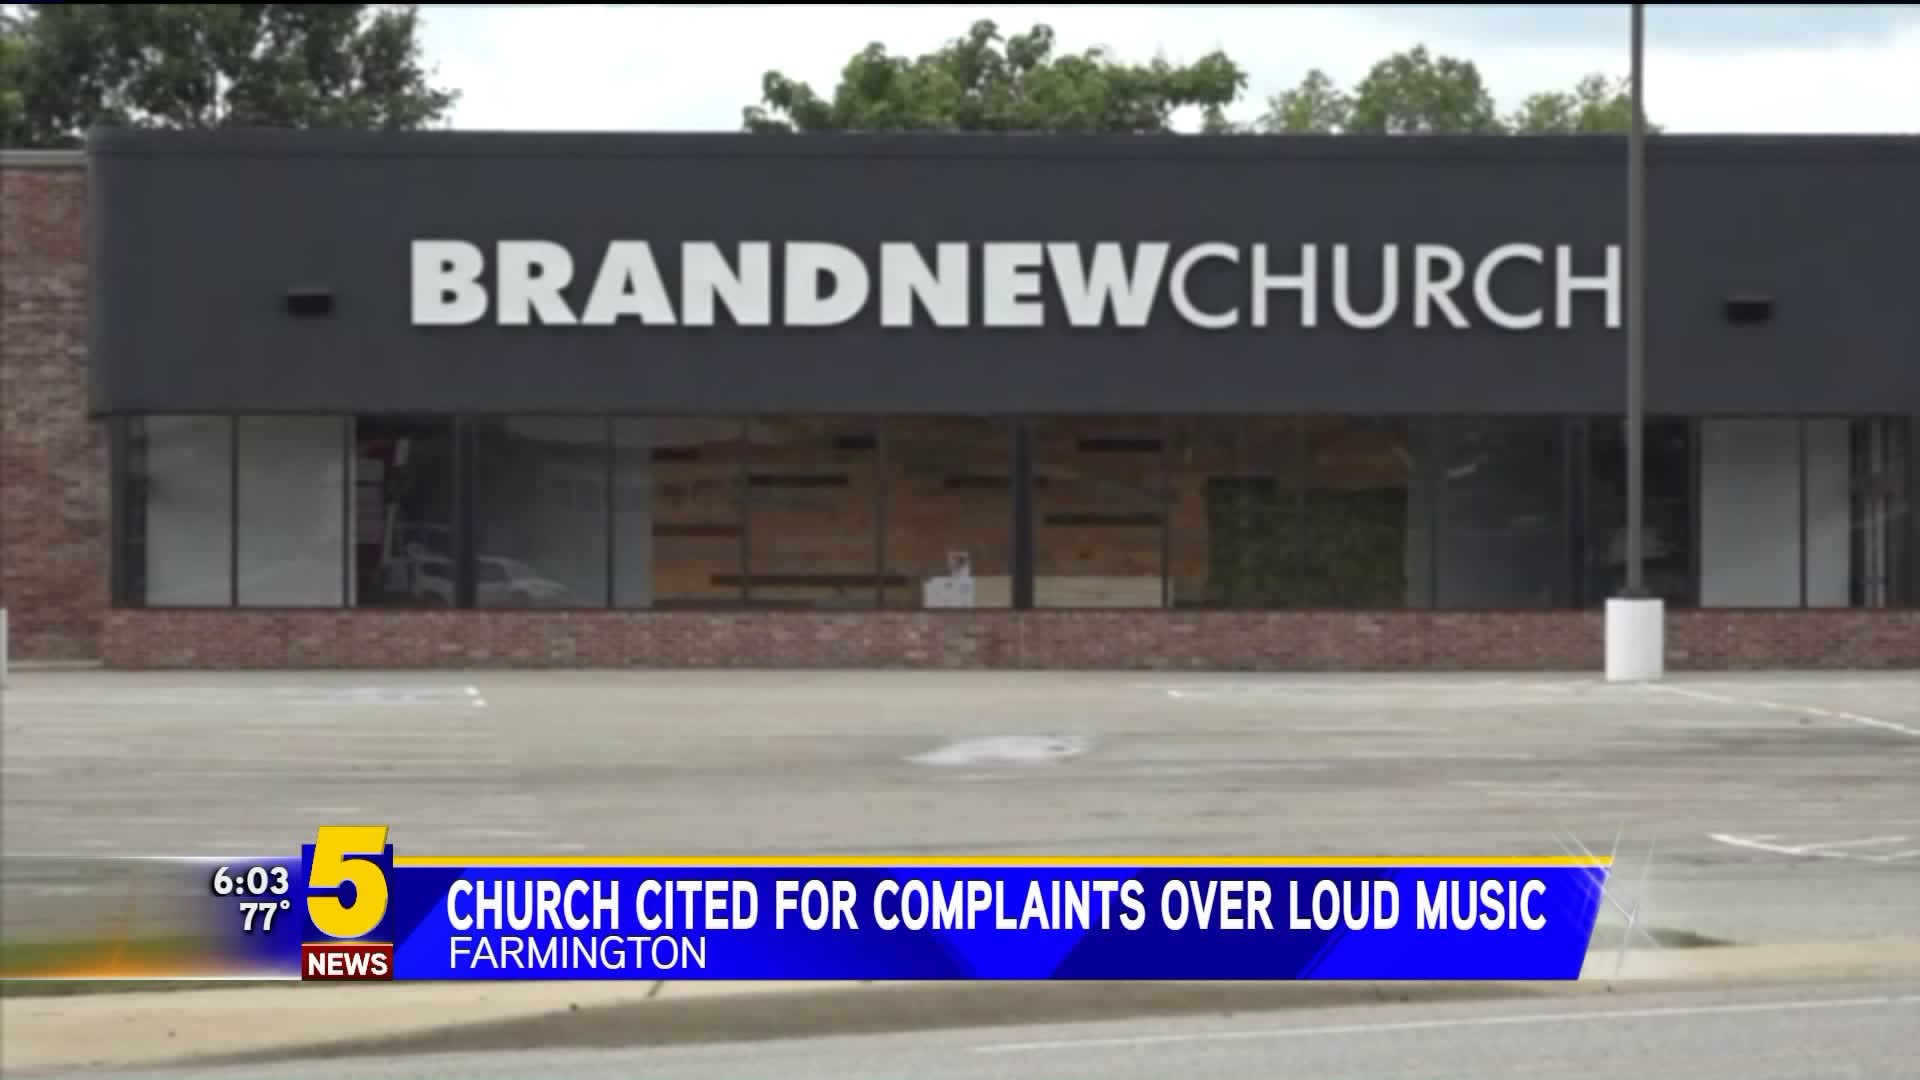 Church Cited for Complaints Over Loud Music